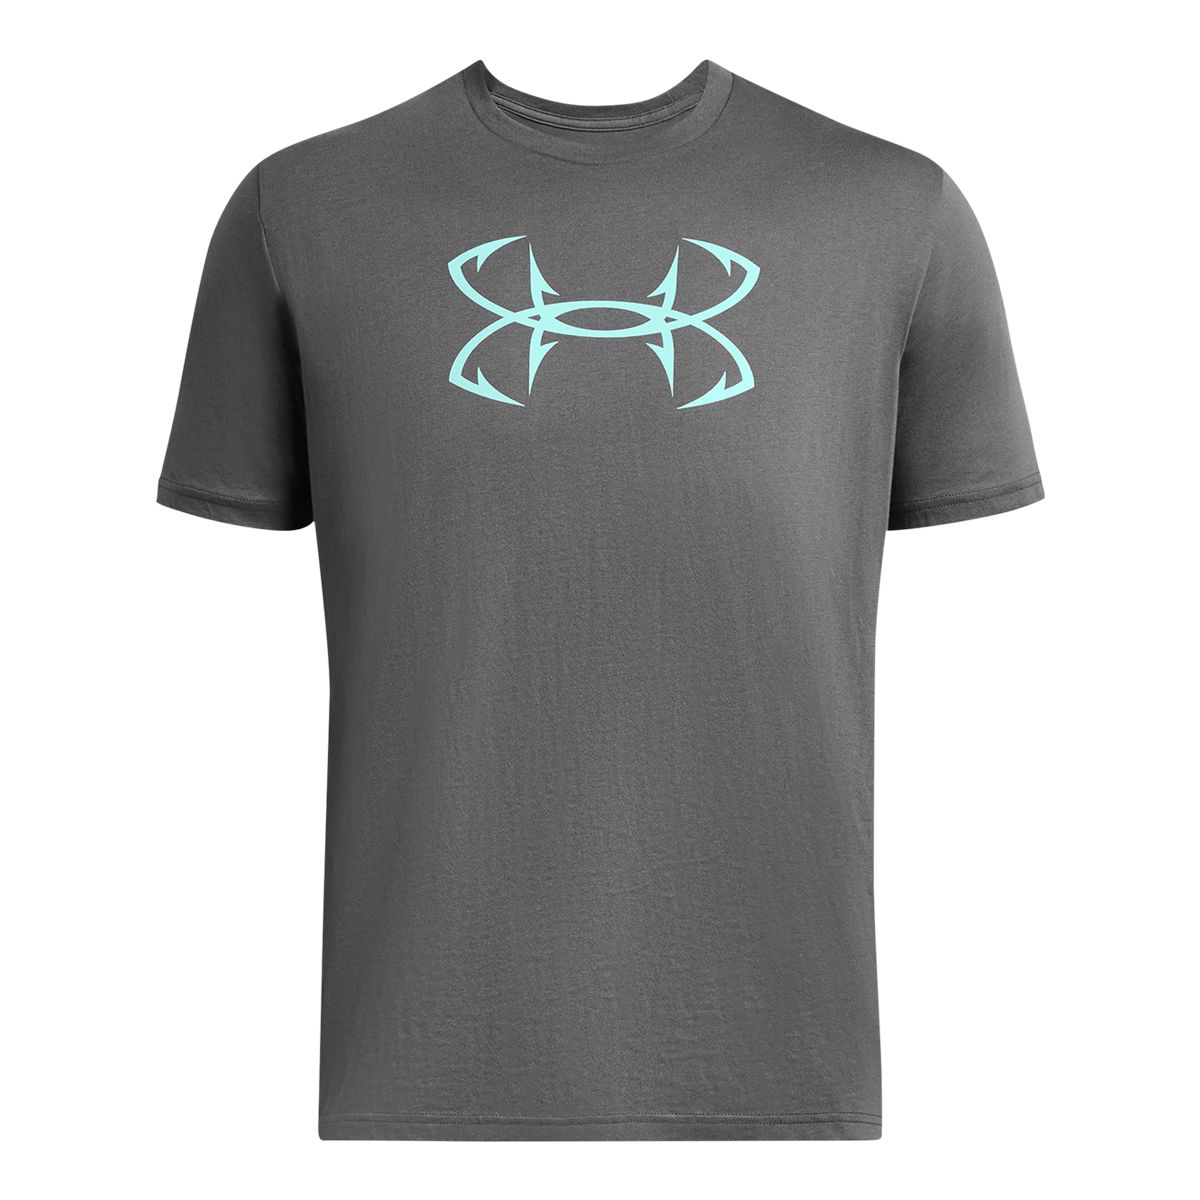 https://media-www.sportchek.ca/product/div-03-softgoods/dpt-72-casual-clothing/sdpt-01-mens/334265290/under-armour-men-s-fish-hook-logo-t-shirt-1de4f882-5f92-41c5-8514-c57e19ee4dc7-jpgrendition.jpg?imdensity=1&imwidth=1244&impolicy=mZoom